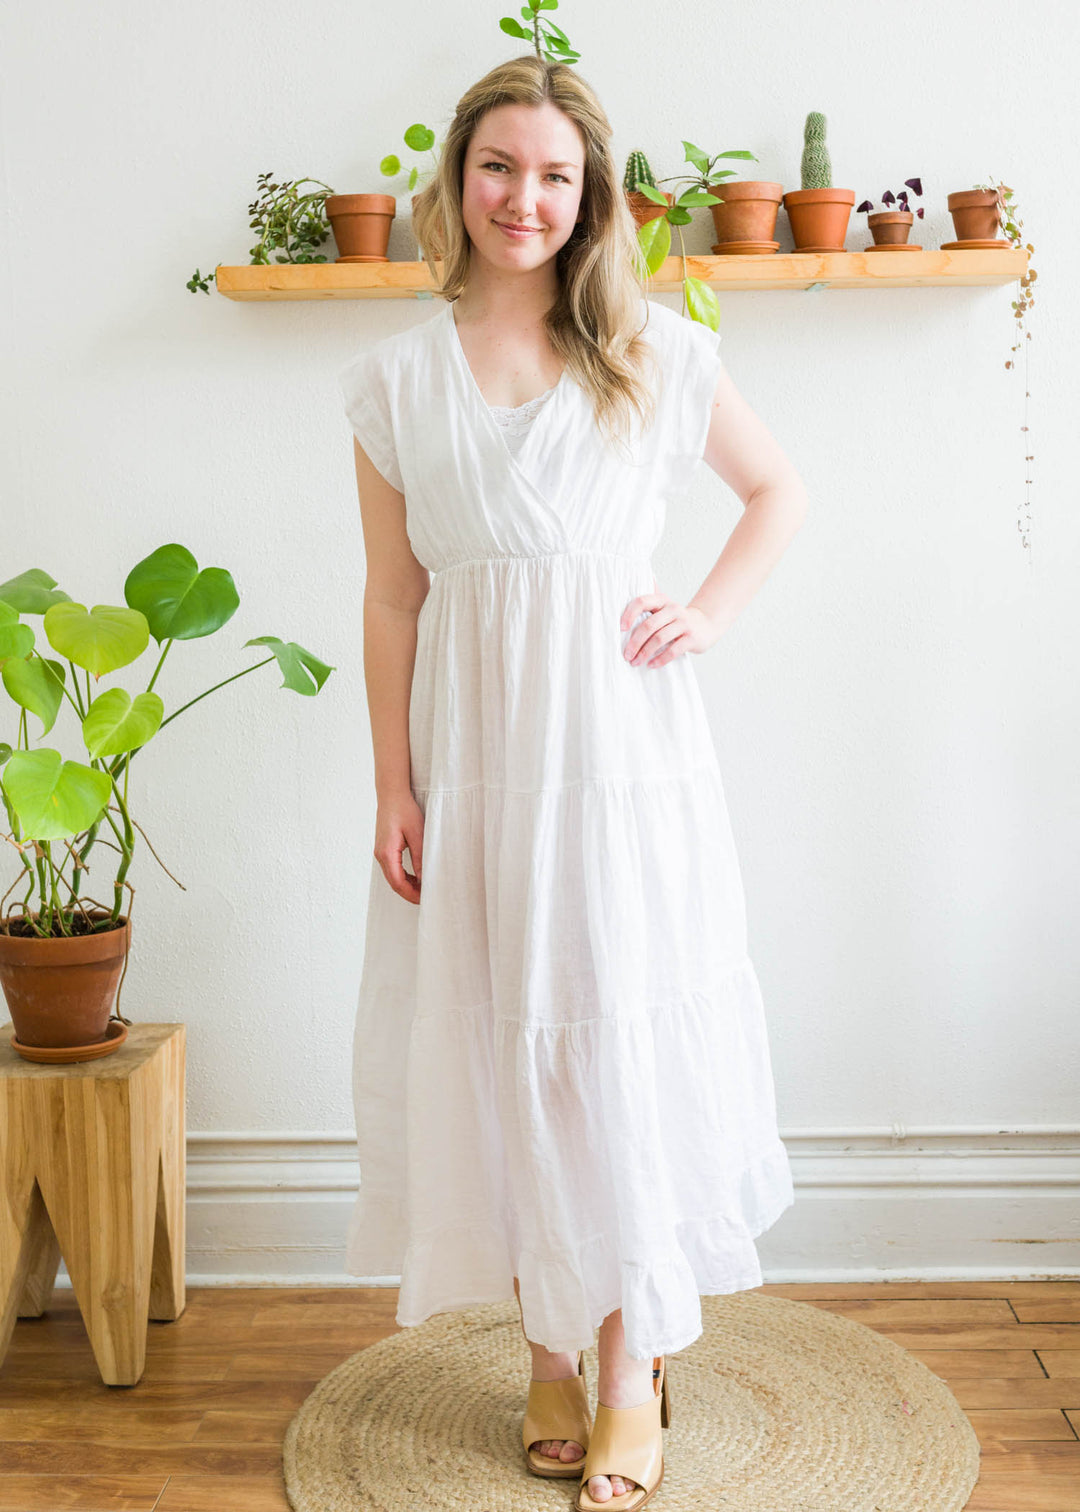 How to wear a white linen dress